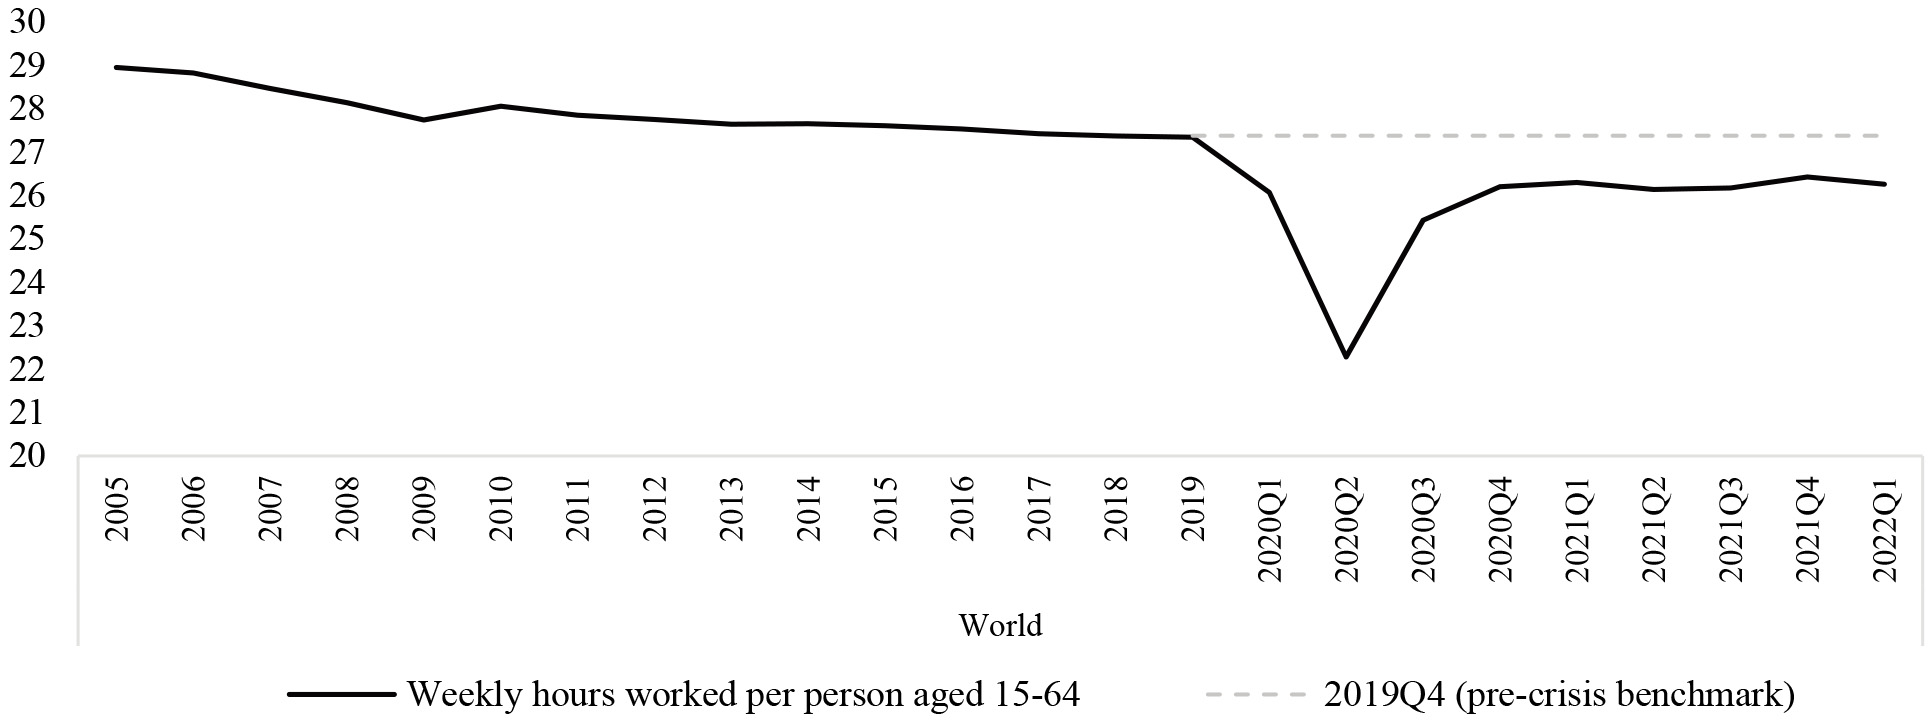 Estimates of global weekly hours worked (divided by 15–64 population). Results of ILO Nowcasting model for the period 2005-2022Q1 at the global level. The 2005–2019 period is only estimated at the annual level, whereas from 2020Q1 and onwards quarterly estimates are available.